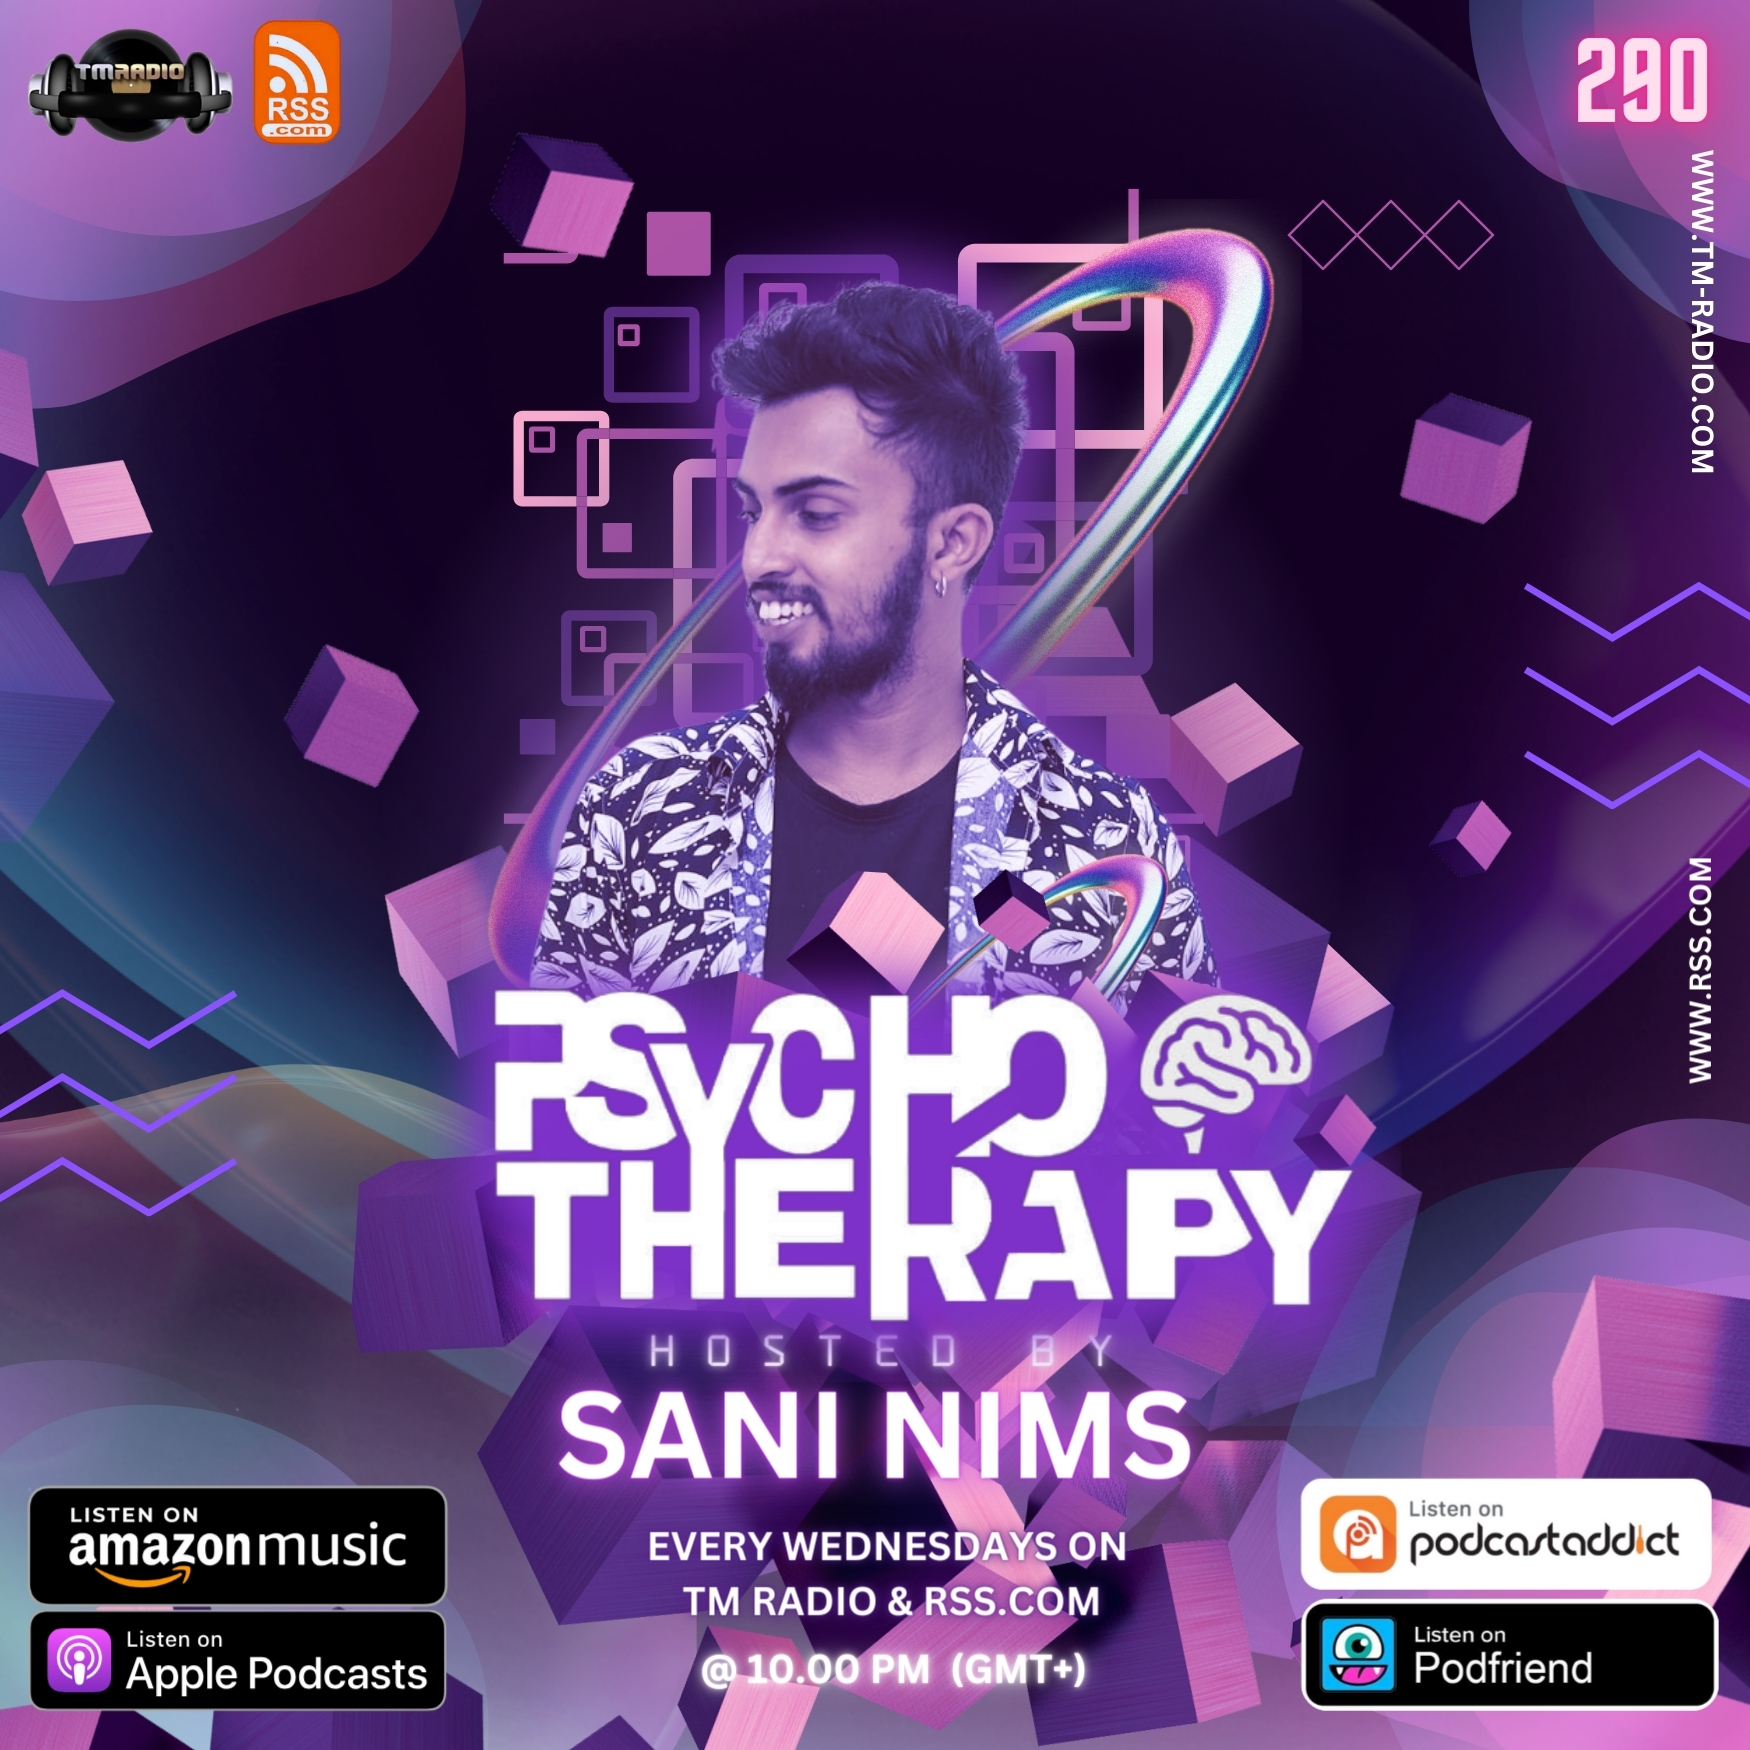 PSYCHO THERAPY EP 290 BY SANI NIMS ON TM RADIO (from May 8th)